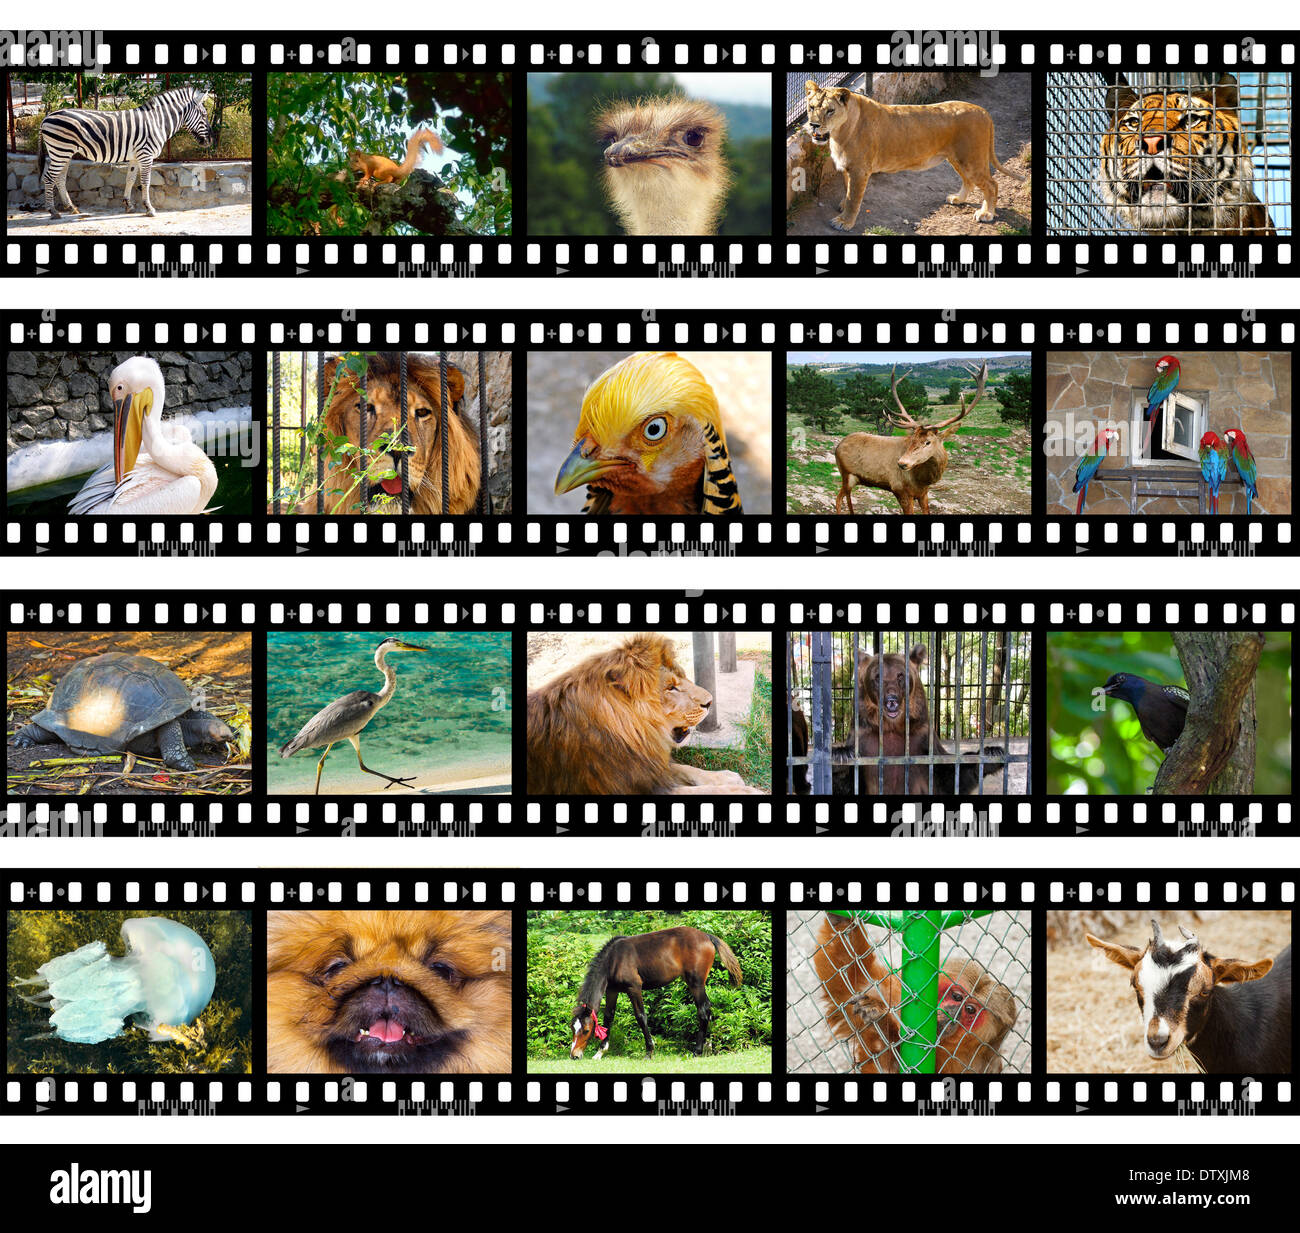 Animals in frames of film Stock Photo